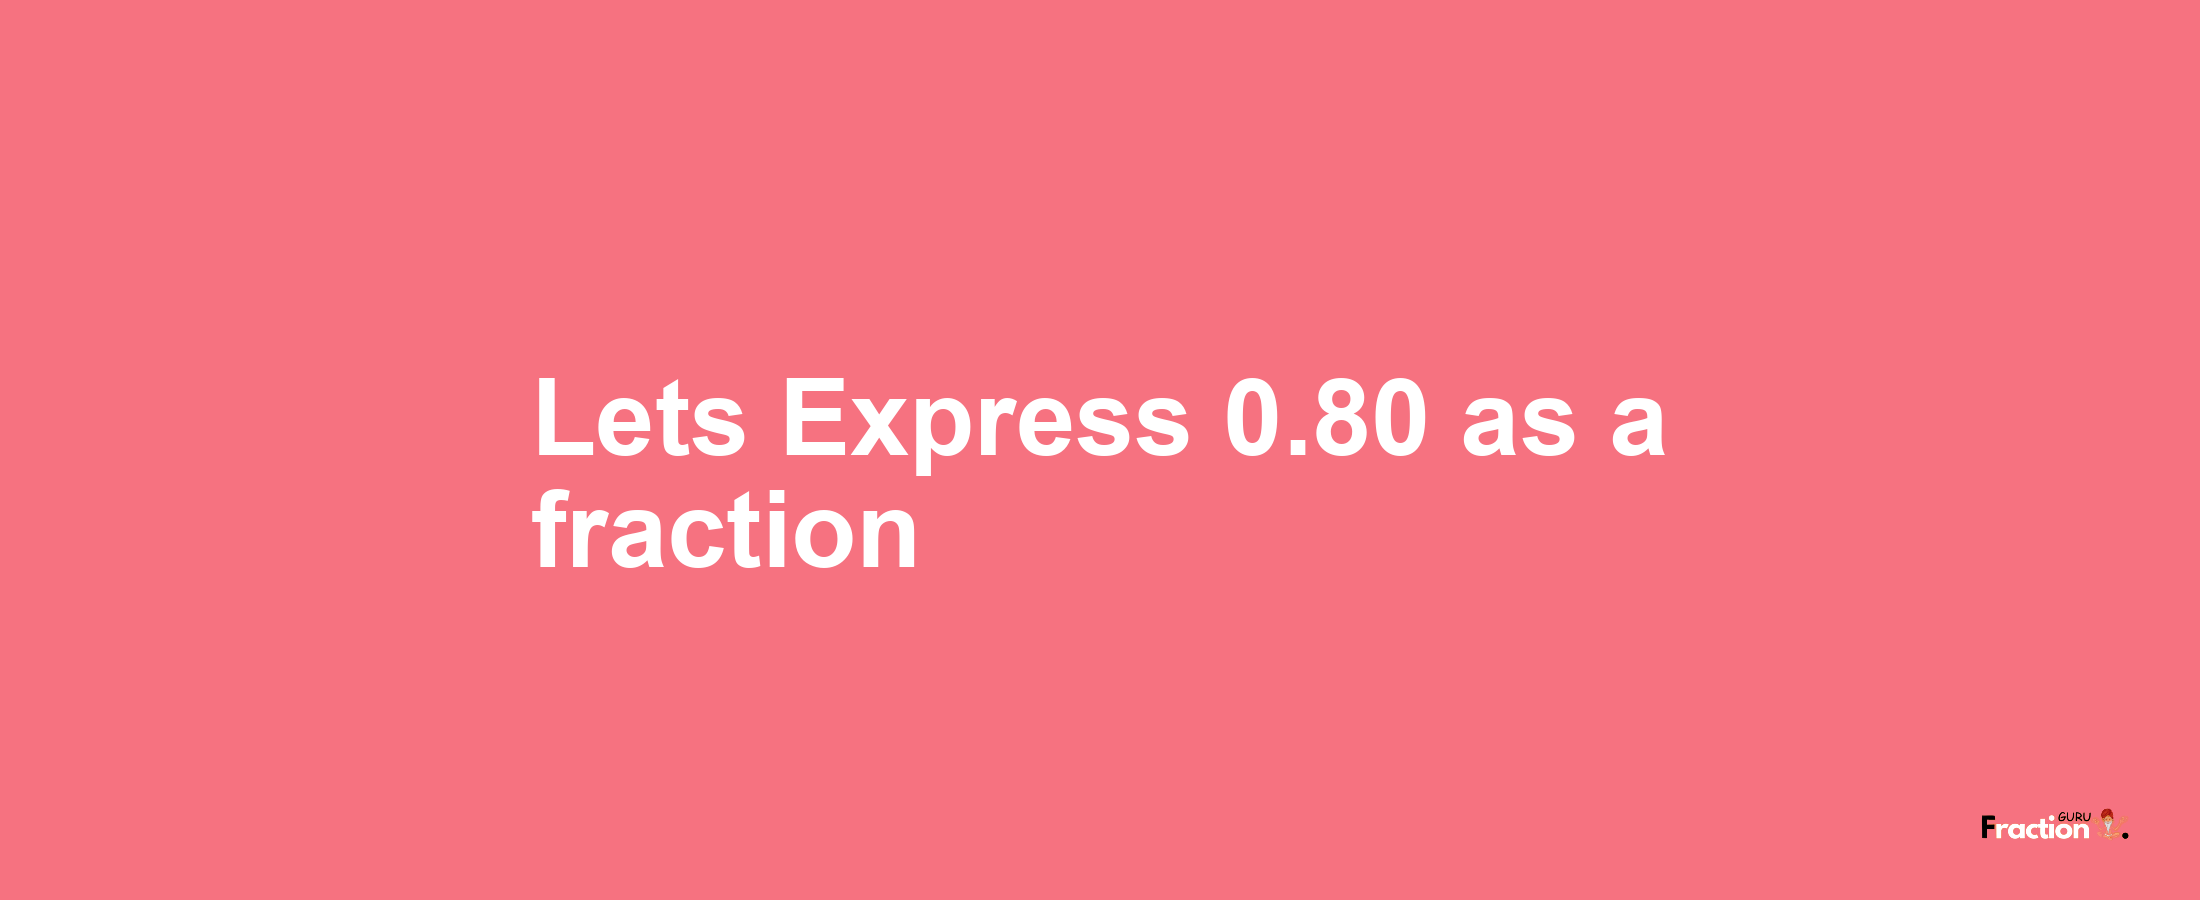 Lets Express 0.80 as afraction